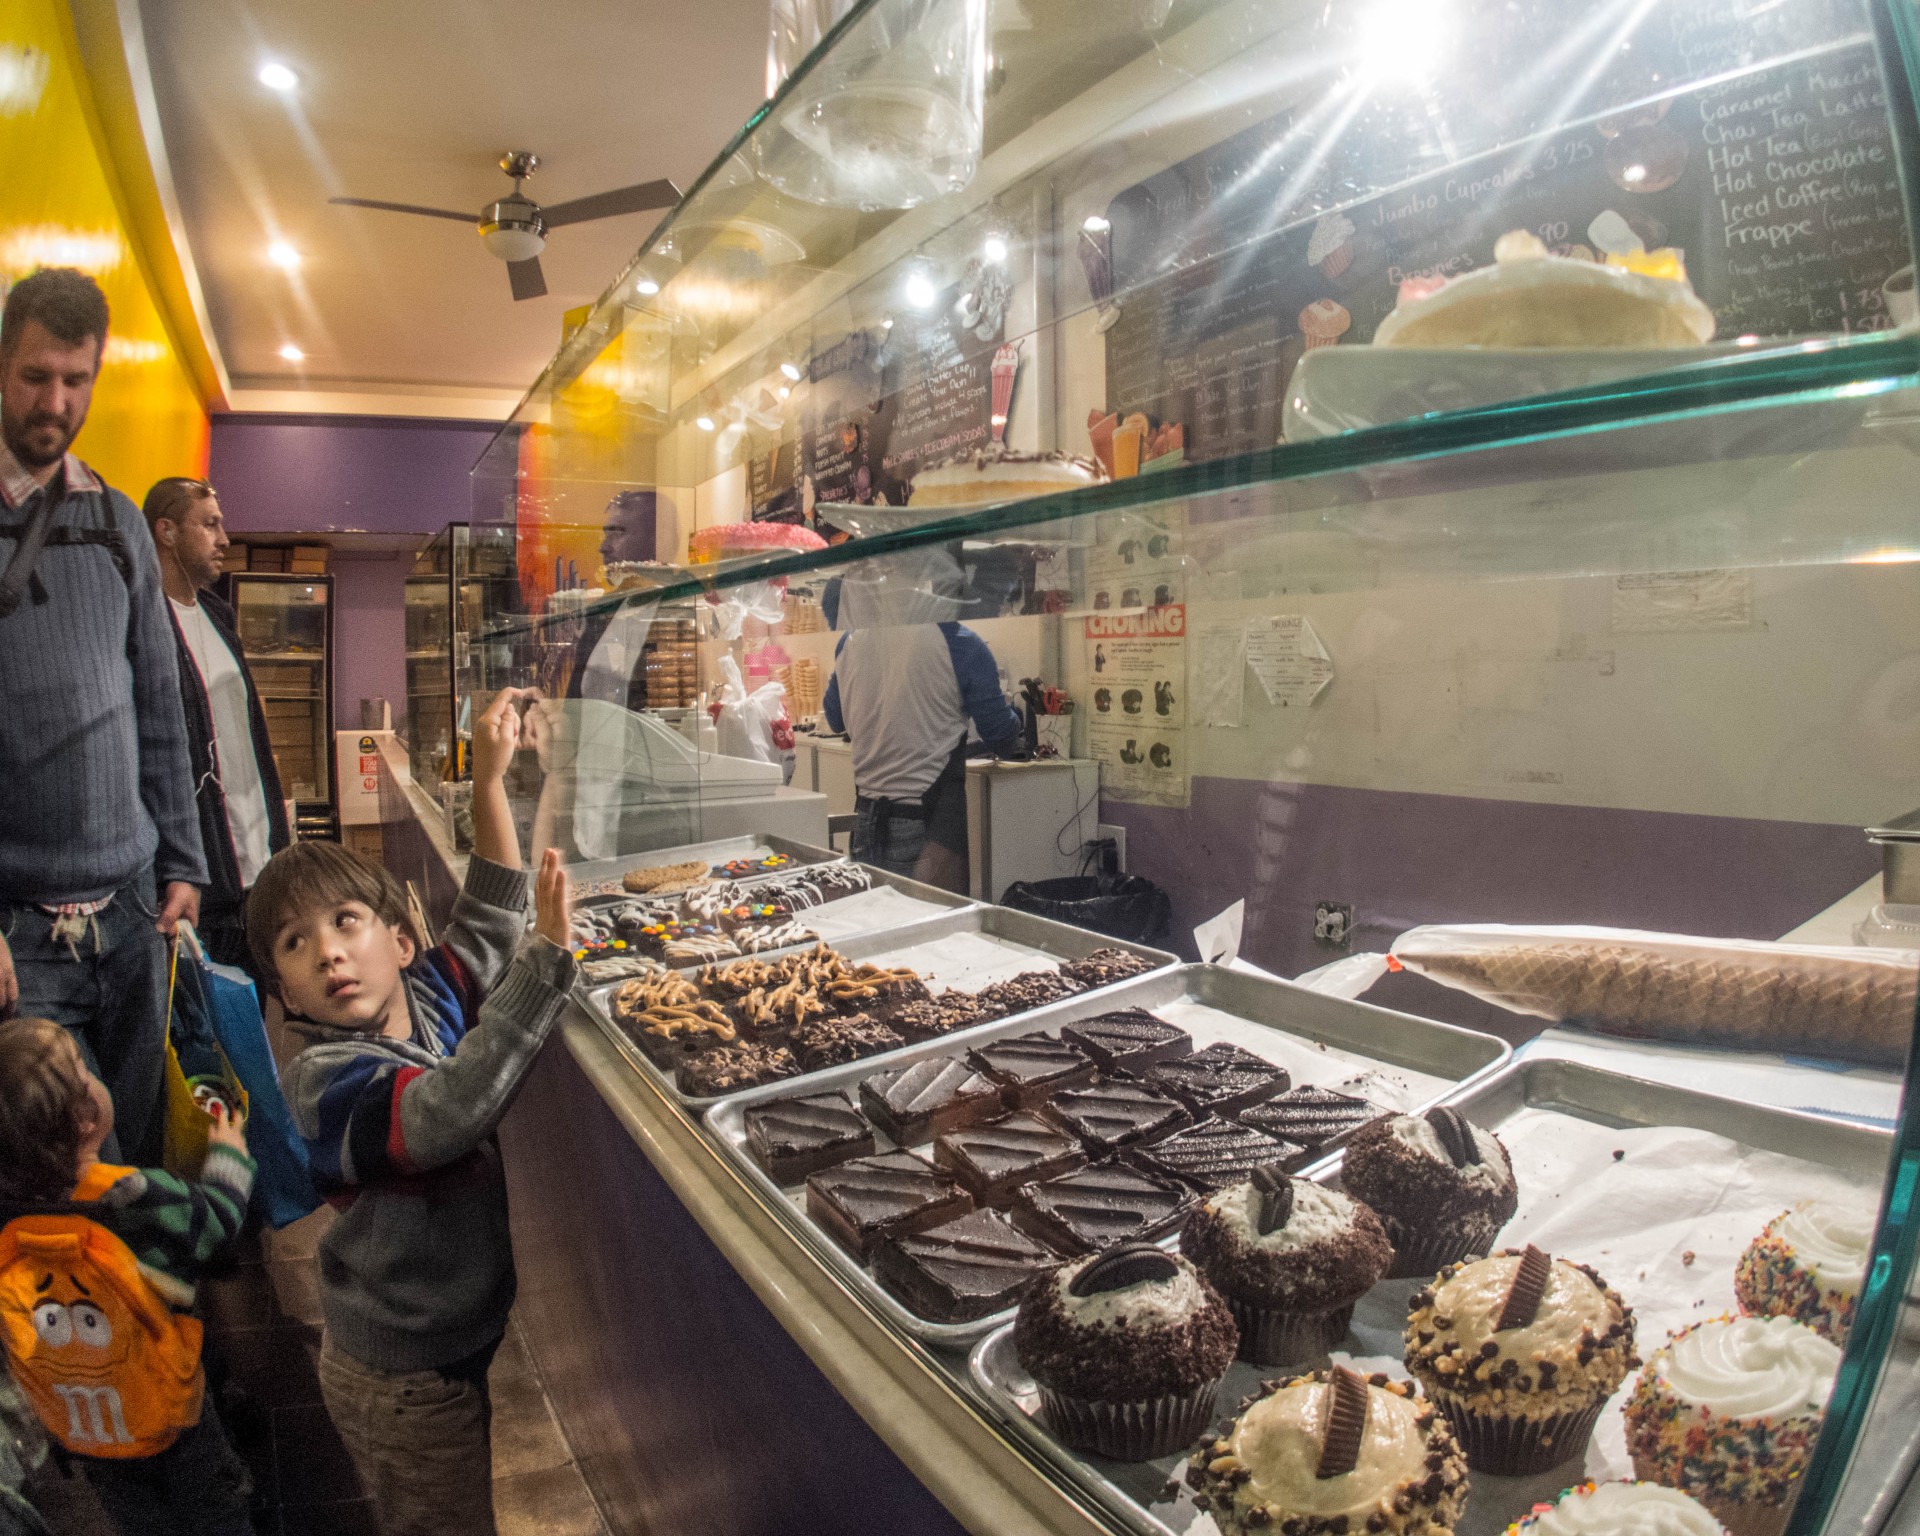 A young boy points at treats in a bakery window